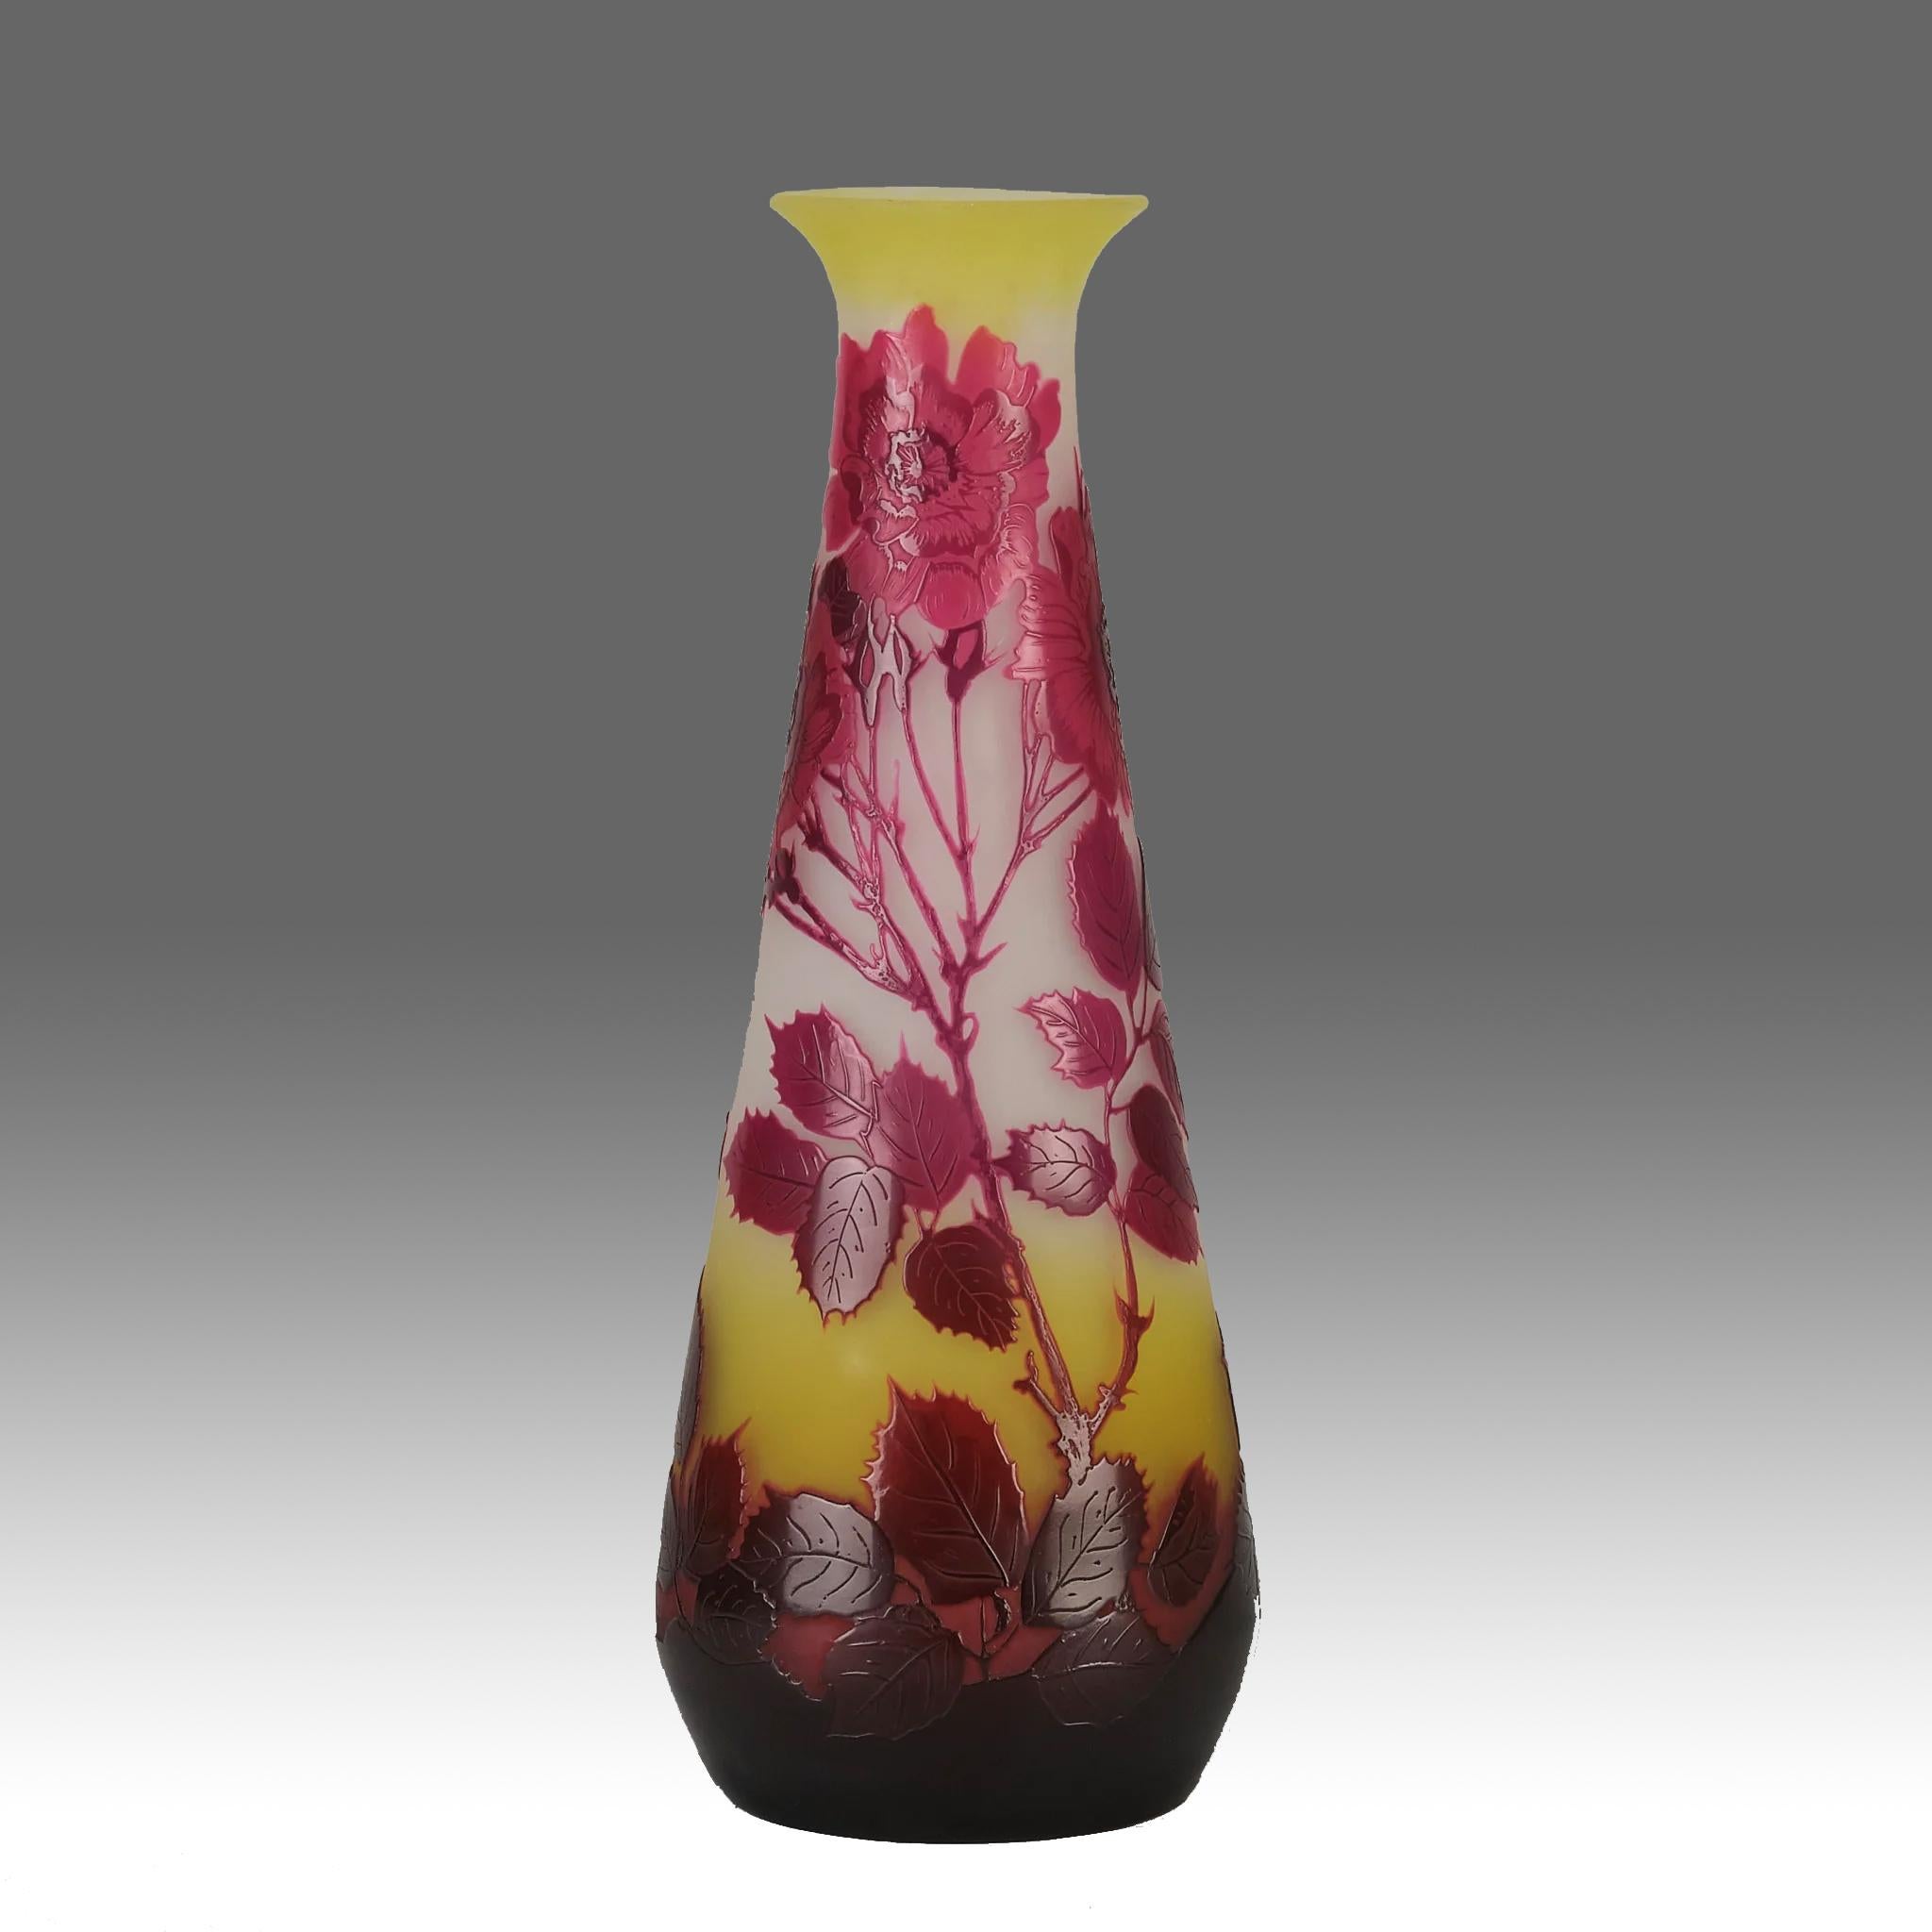 A magnificent late 19th Century French cameo glass vase decorated with a very fine deep pink and red floral design of wild roses against a warm yellow field. Exhibiting excellent detail and colour, signed Galle in cameo.

ADDITIONAL